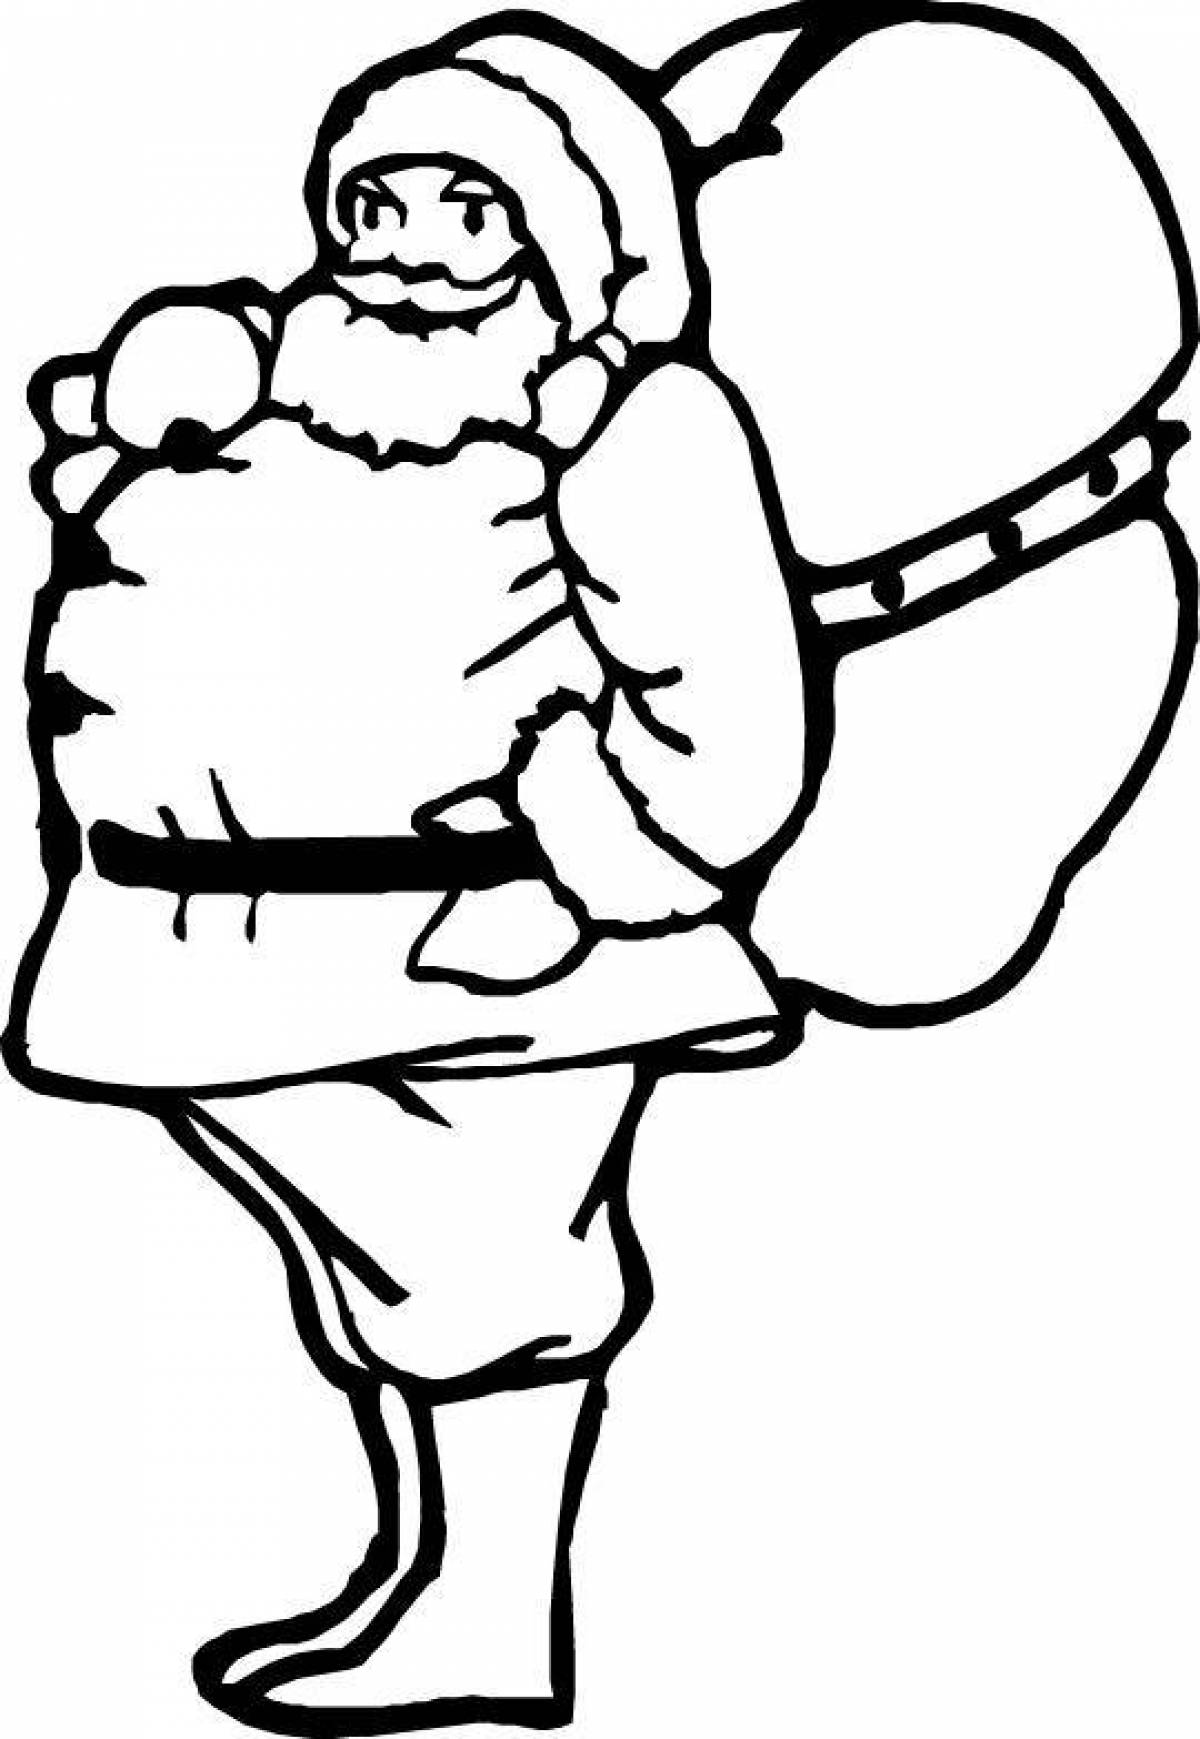 Coloring book exquisite Santa Claus with a bag